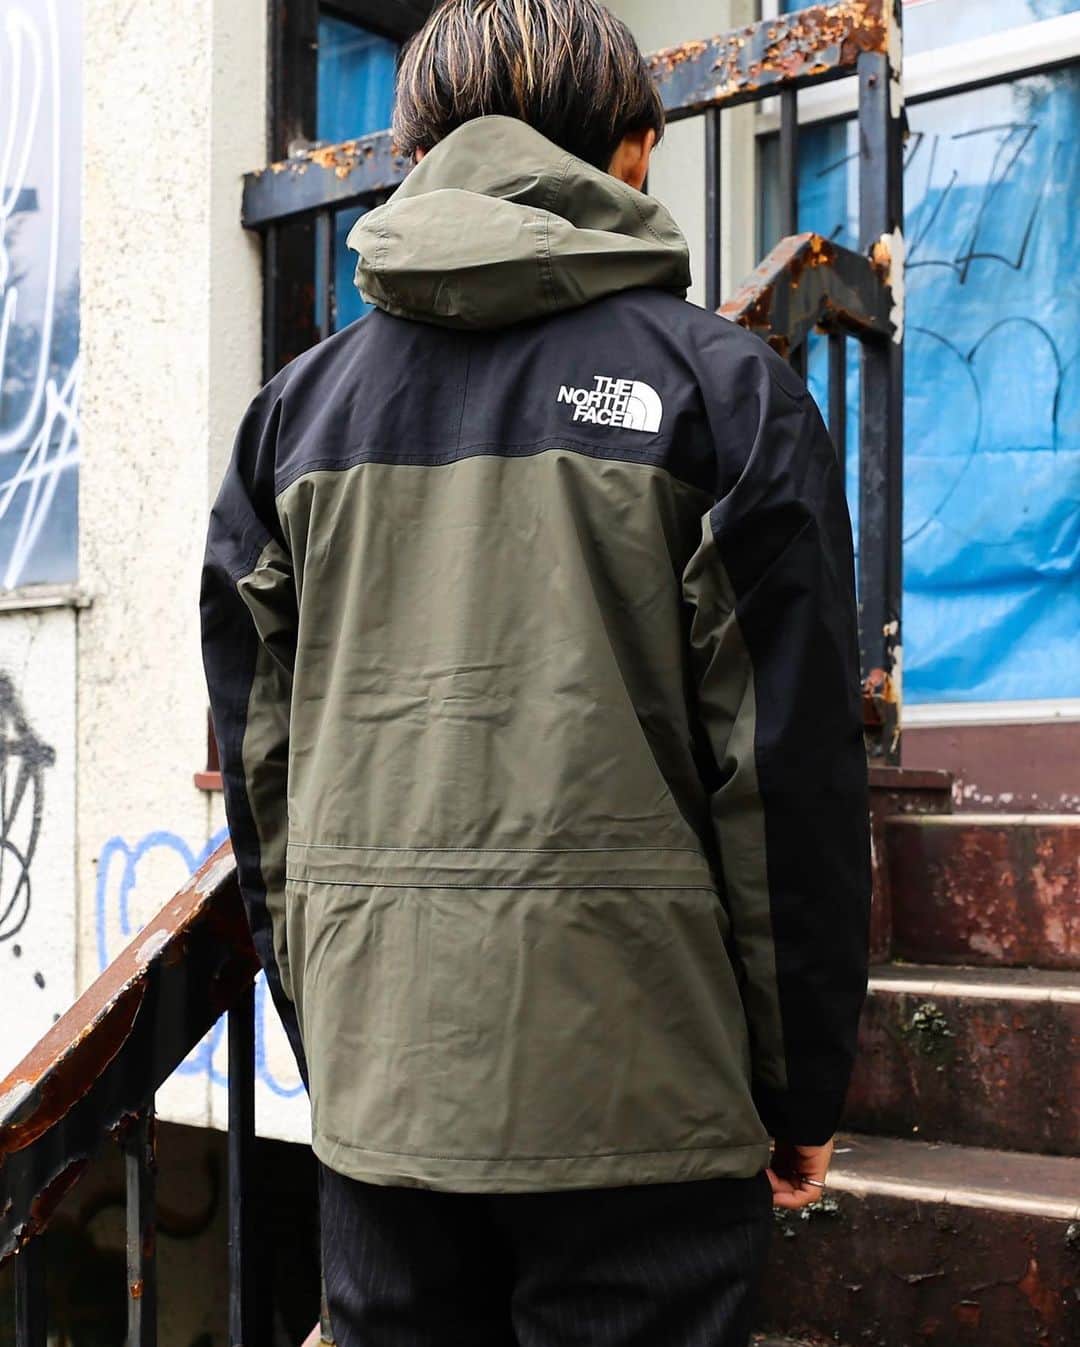 アトモスさんのインスタグラム写真 - (アトモスInstagram)「. 10/9(FRI)よりTHE NORTH FACE 20FW MOUNTAIN LIGHT JACKETが登場。 GORE-TEX products2層構造を採用した防水シェルジャケット。THE NORTH FACEの定番である肩部分の切り替えを取り入れた、アイコニックなデザインです。耐久性の高い70デニールナイロンを表生地に使用し、フロントはダブルフラップ仕様で防水性を高めています。内側の専用ファスナーでインナーを連結できるジップインジップシステム対応。今回は爽やかなブルーのトランスアンタークティック、ノースフェイスの代表色のサミットゴールド、定番色のニュートープの3色展開。トレッキングやキャンプのアウトドアのみならず、デイリーユースにも適した1着です。 . ※カラーによって展開店舗が異なります。 ※詳しくはatmos-tokyo.comのRELEASE INFOをご確認ください。 . THE NORTH FACE MOUNTAIN LIGHT JACKET 20FW will be released from 10/9 (FRI). GORE-TEX products Waterproof shell jacket with a two-layer structure. It is an iconic design that incorporates the standard shoulder switching of THE NORTH FACE. Durable 70 denier nylon is used for the outer fabric, and the front has a double flap design to improve waterproofness. Compatible with the zip-in zip system that allows you to connect the inner with a special zipper on the inside. This time, three colors are available: the refreshing blue transantactic, the North Face masterpiece summit gold, and the classic new taupe. It is suitable not only for trekking and camping outdoors, but also for daily use. * Available stores vary depending on the color. * For details, please see RELEASE INFO on atmos-tokyo.com. . #atmos #atmostokyo #atmosjapan #thenorthface #northface #mountainlight #アトモス #ノースフェイス」10月8日 13時47分 - atmos_japan